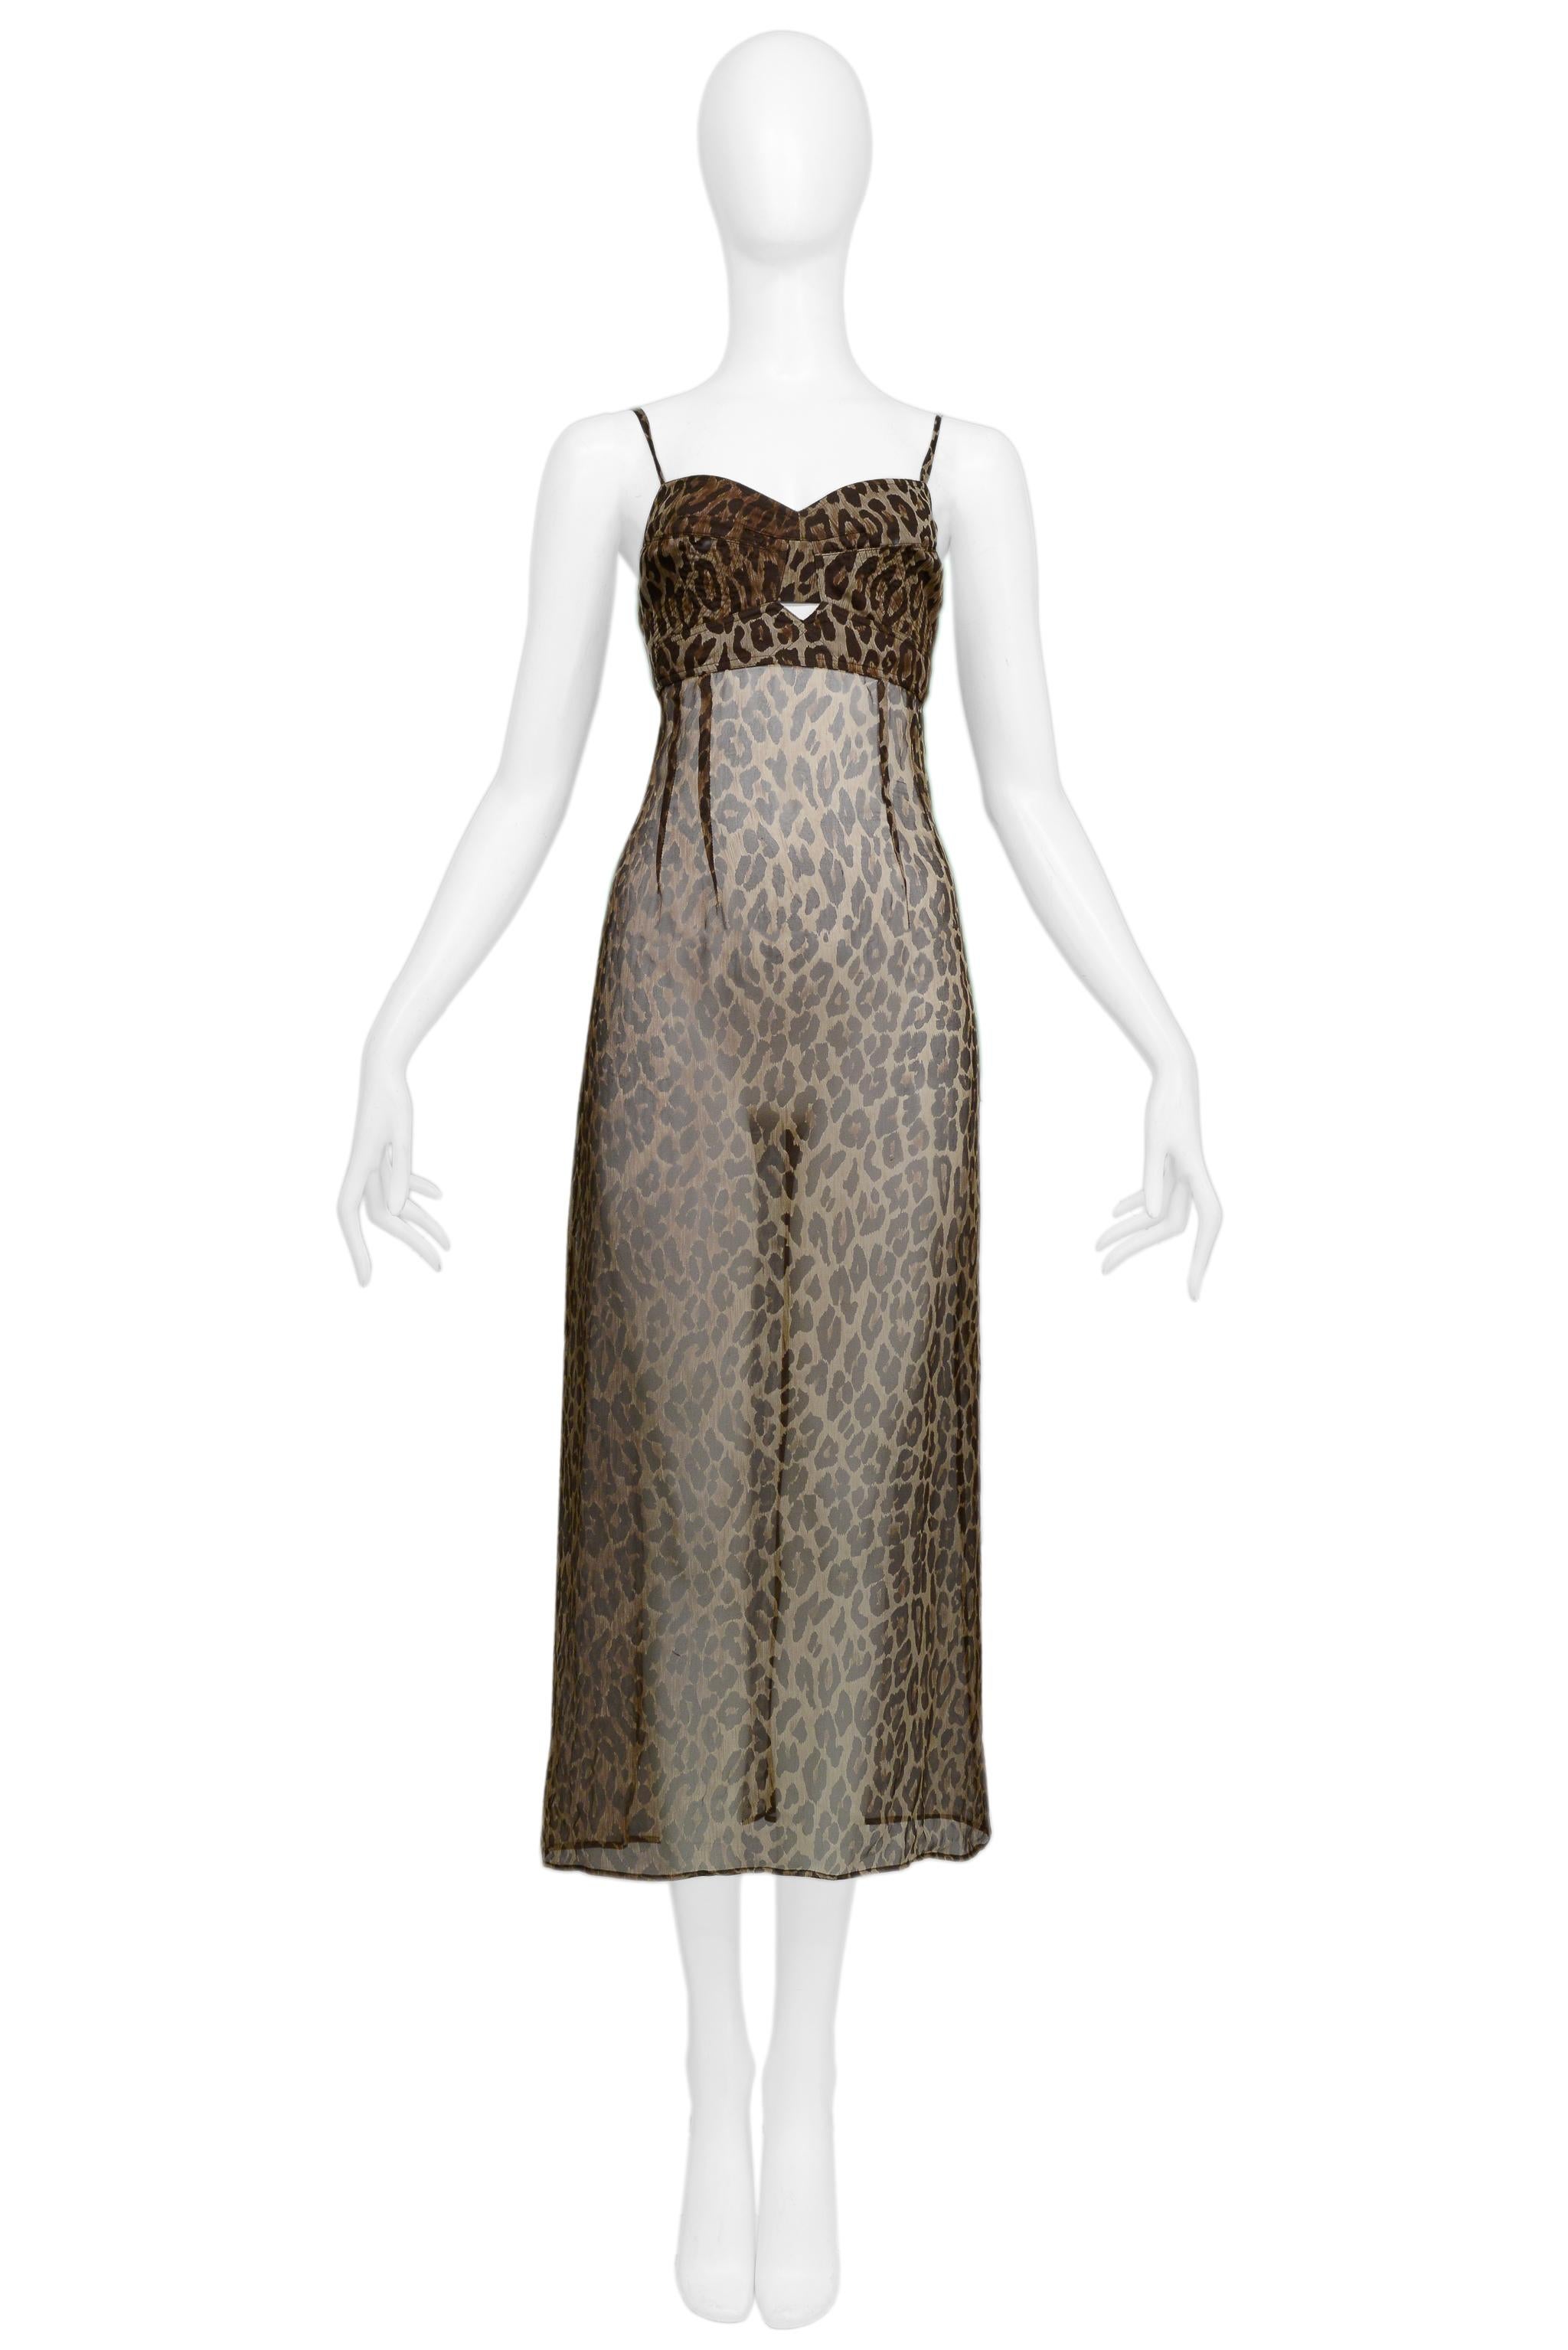 Resurrection Vintage is excited to offer a vintage Dolce & Gabbana leopard print sheer slip dress featuring a bra bodice, keyhole detail, skinny straps, long easy body, and center back zipper.

Dolce & Gabbana
Size Small / Unmarked
Measurements Bust